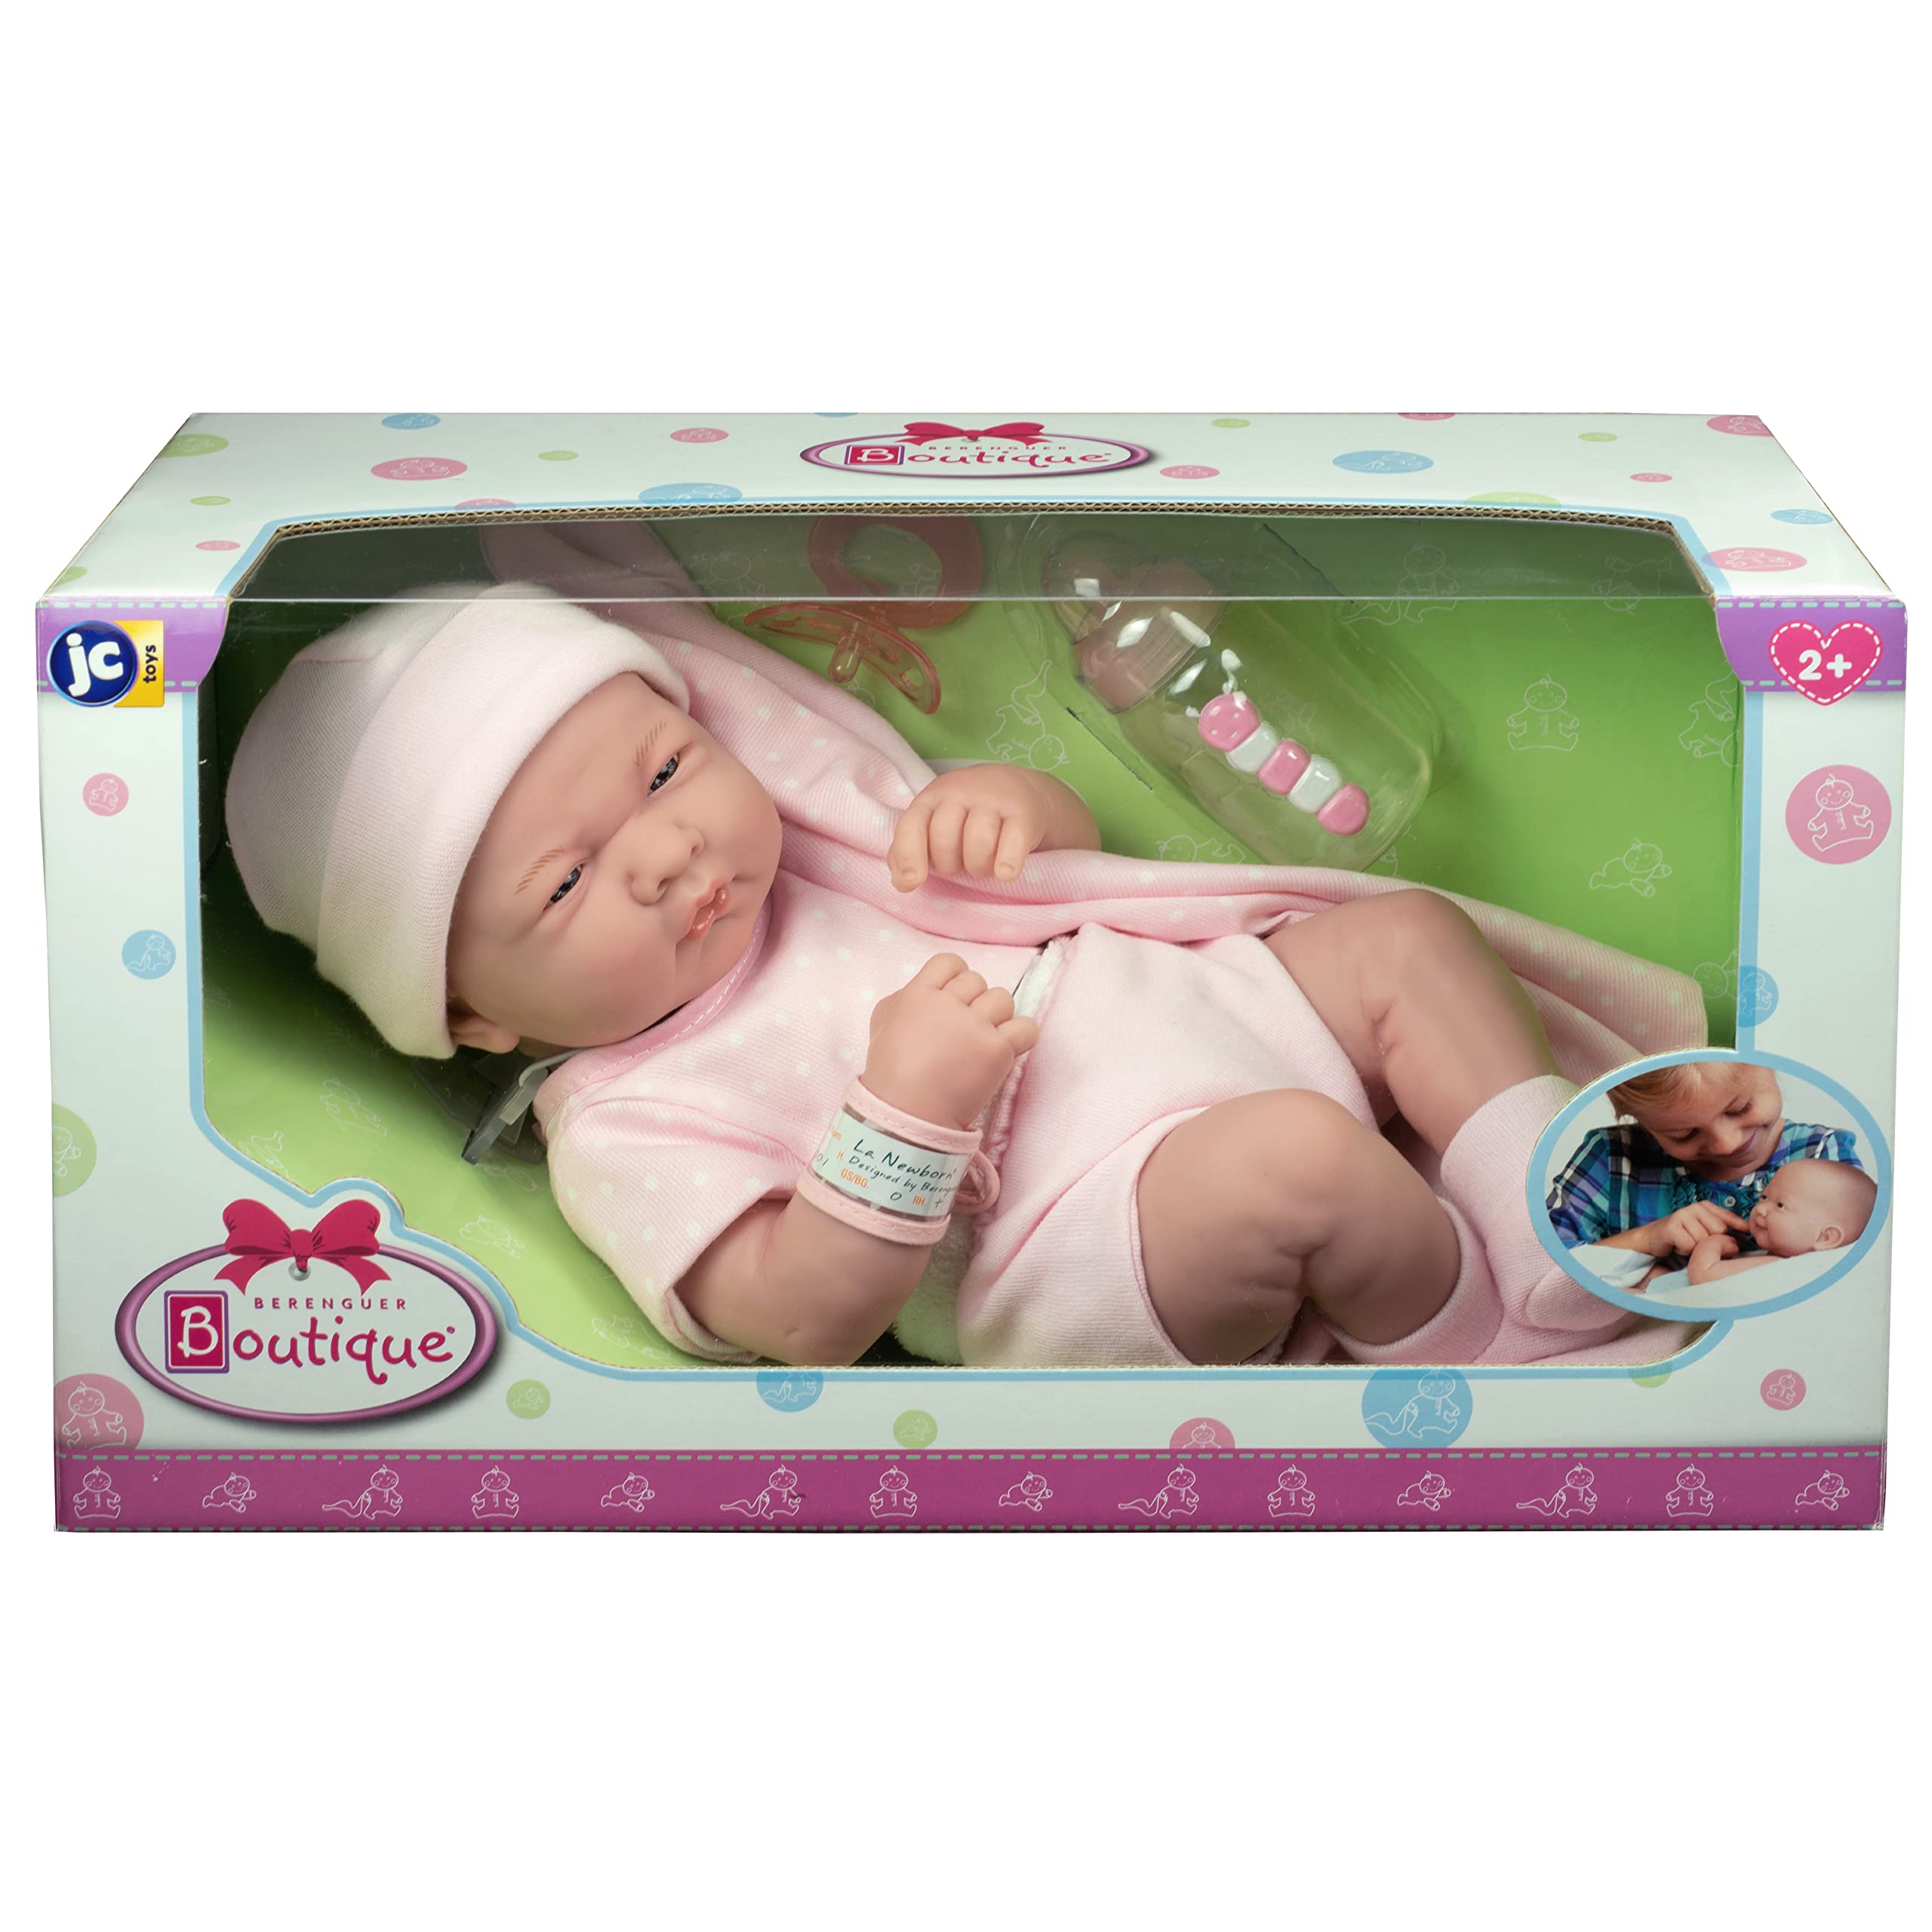 JC Toys 18541 La Newborn Boutique 14 Inch Doll, 9 Piece Set, Real Girl in Pink